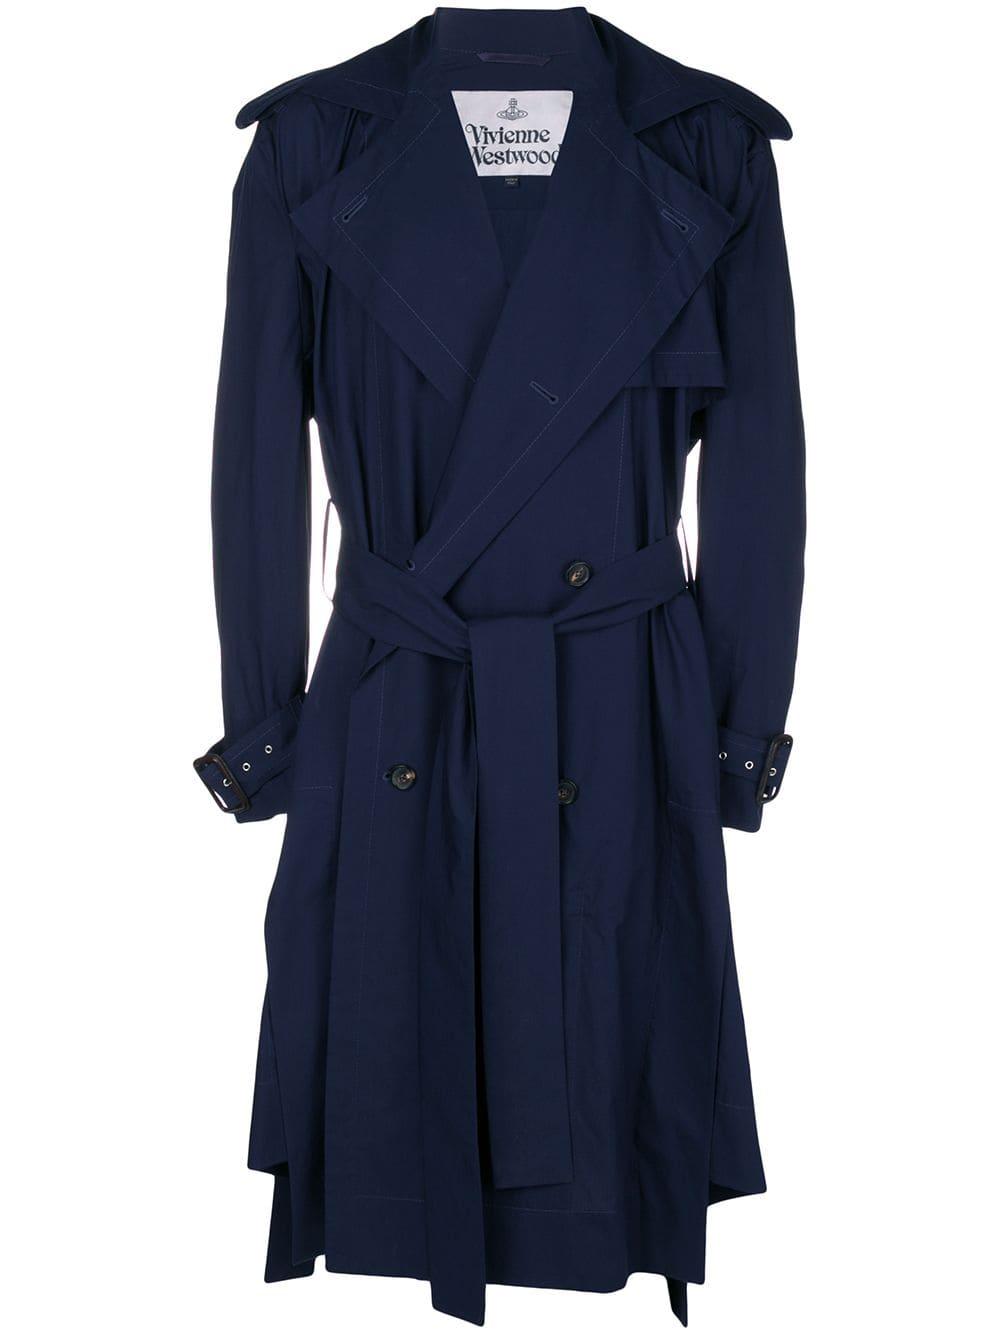 Vivienne Westwood Cotton Oversized Trench Coat in Blue for Men - Lyst